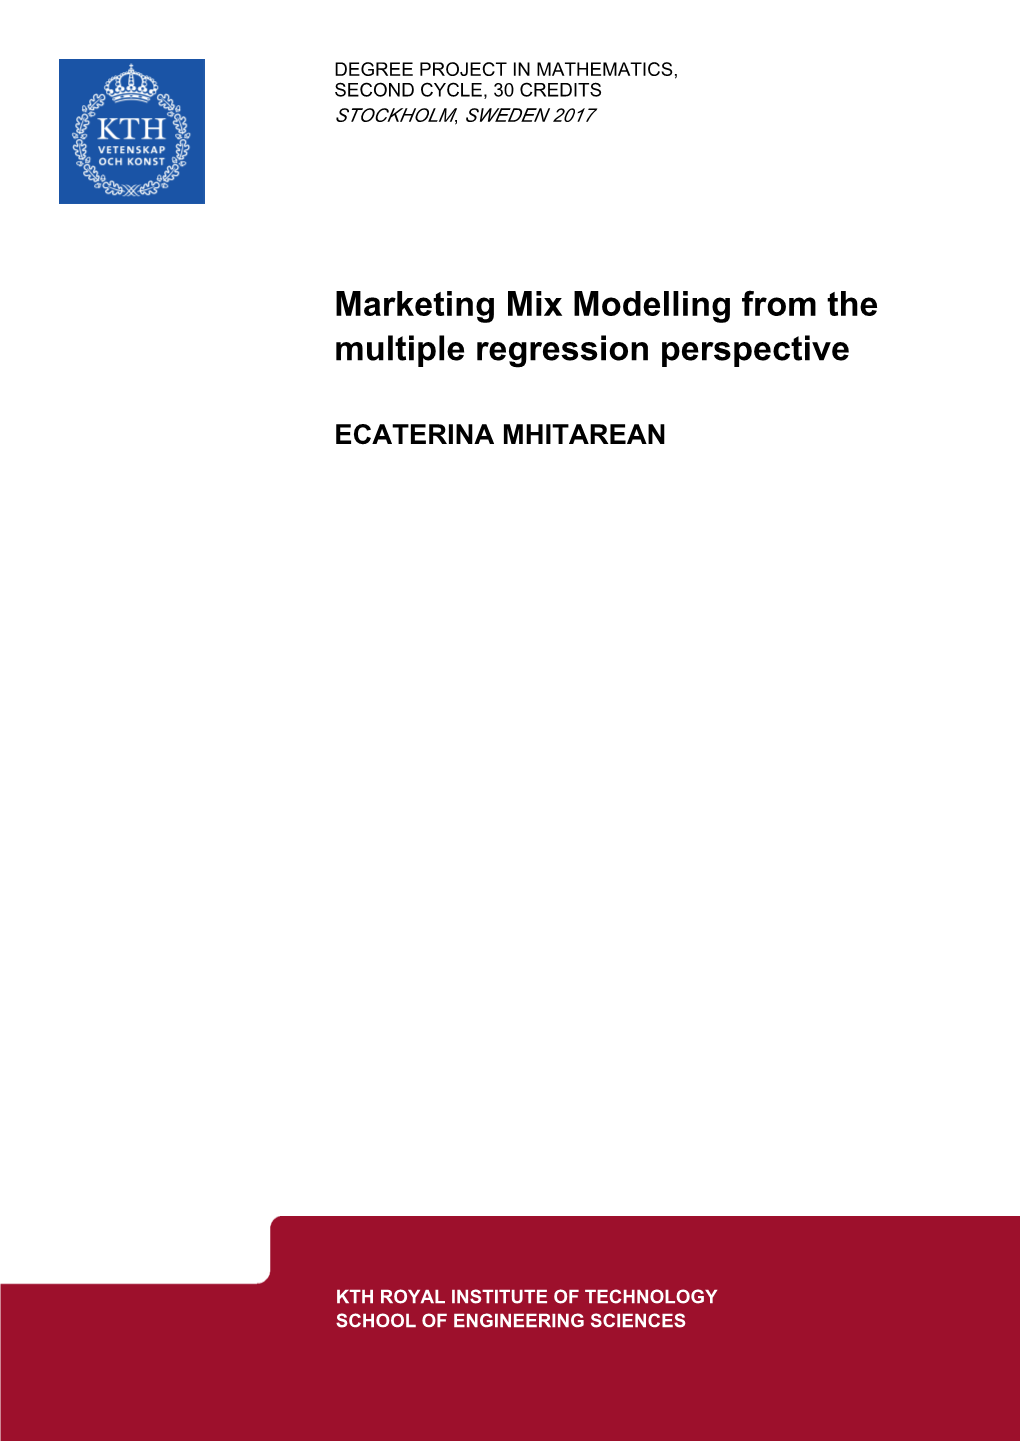 Marketing Mix Modelling from the Multiple Regression Perspective